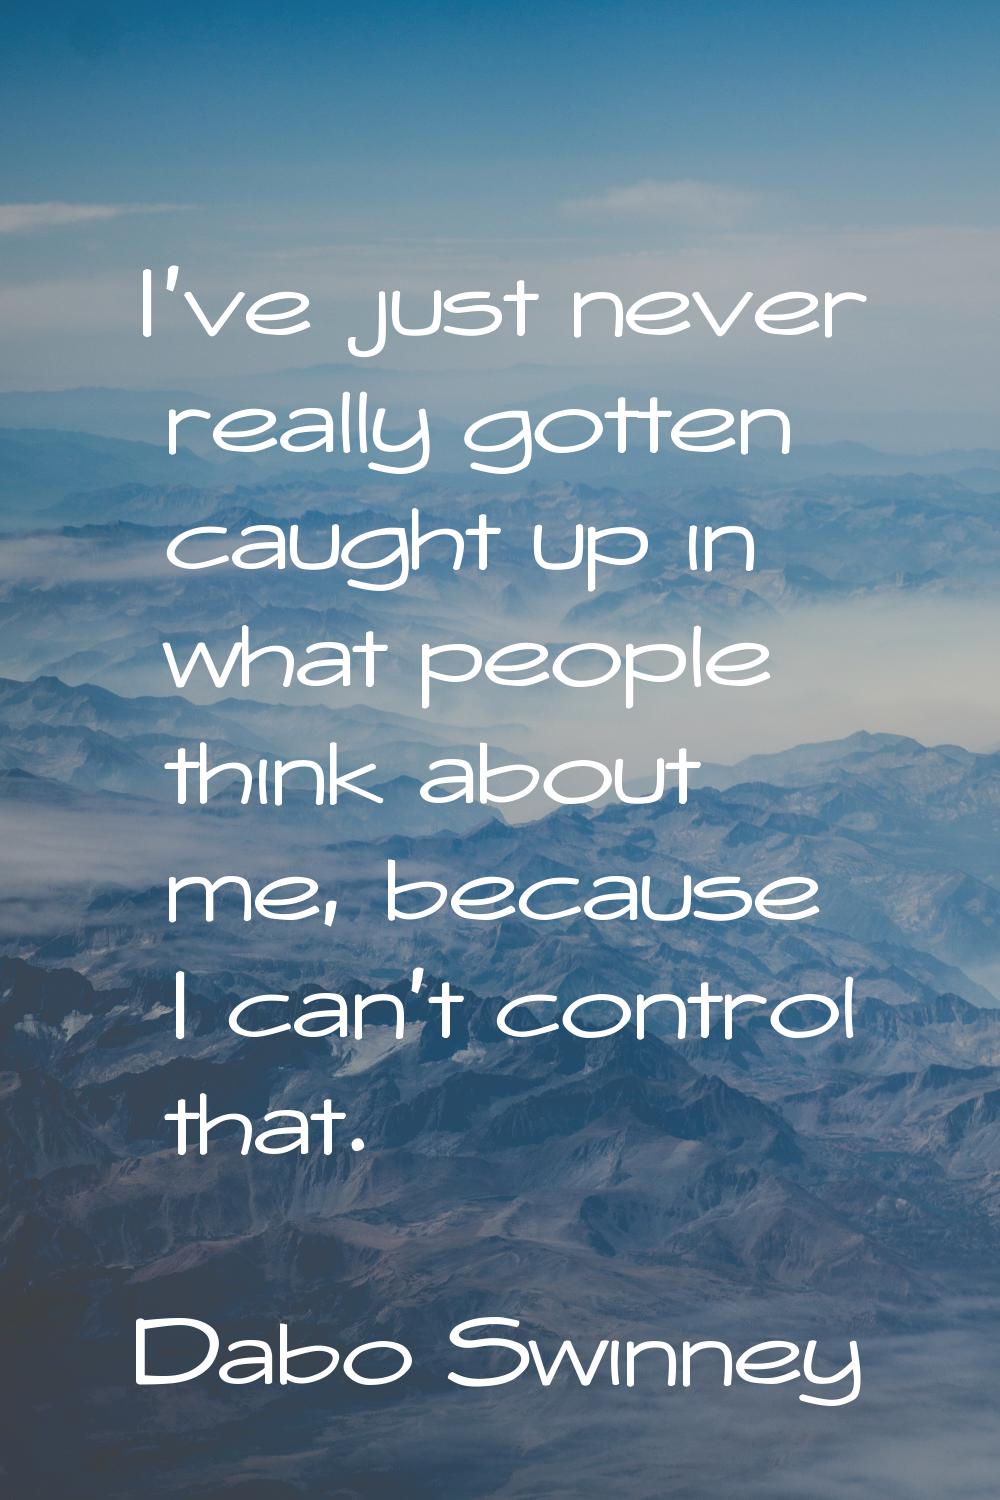 I've just never really gotten caught up in what people think about me, because I can't control that